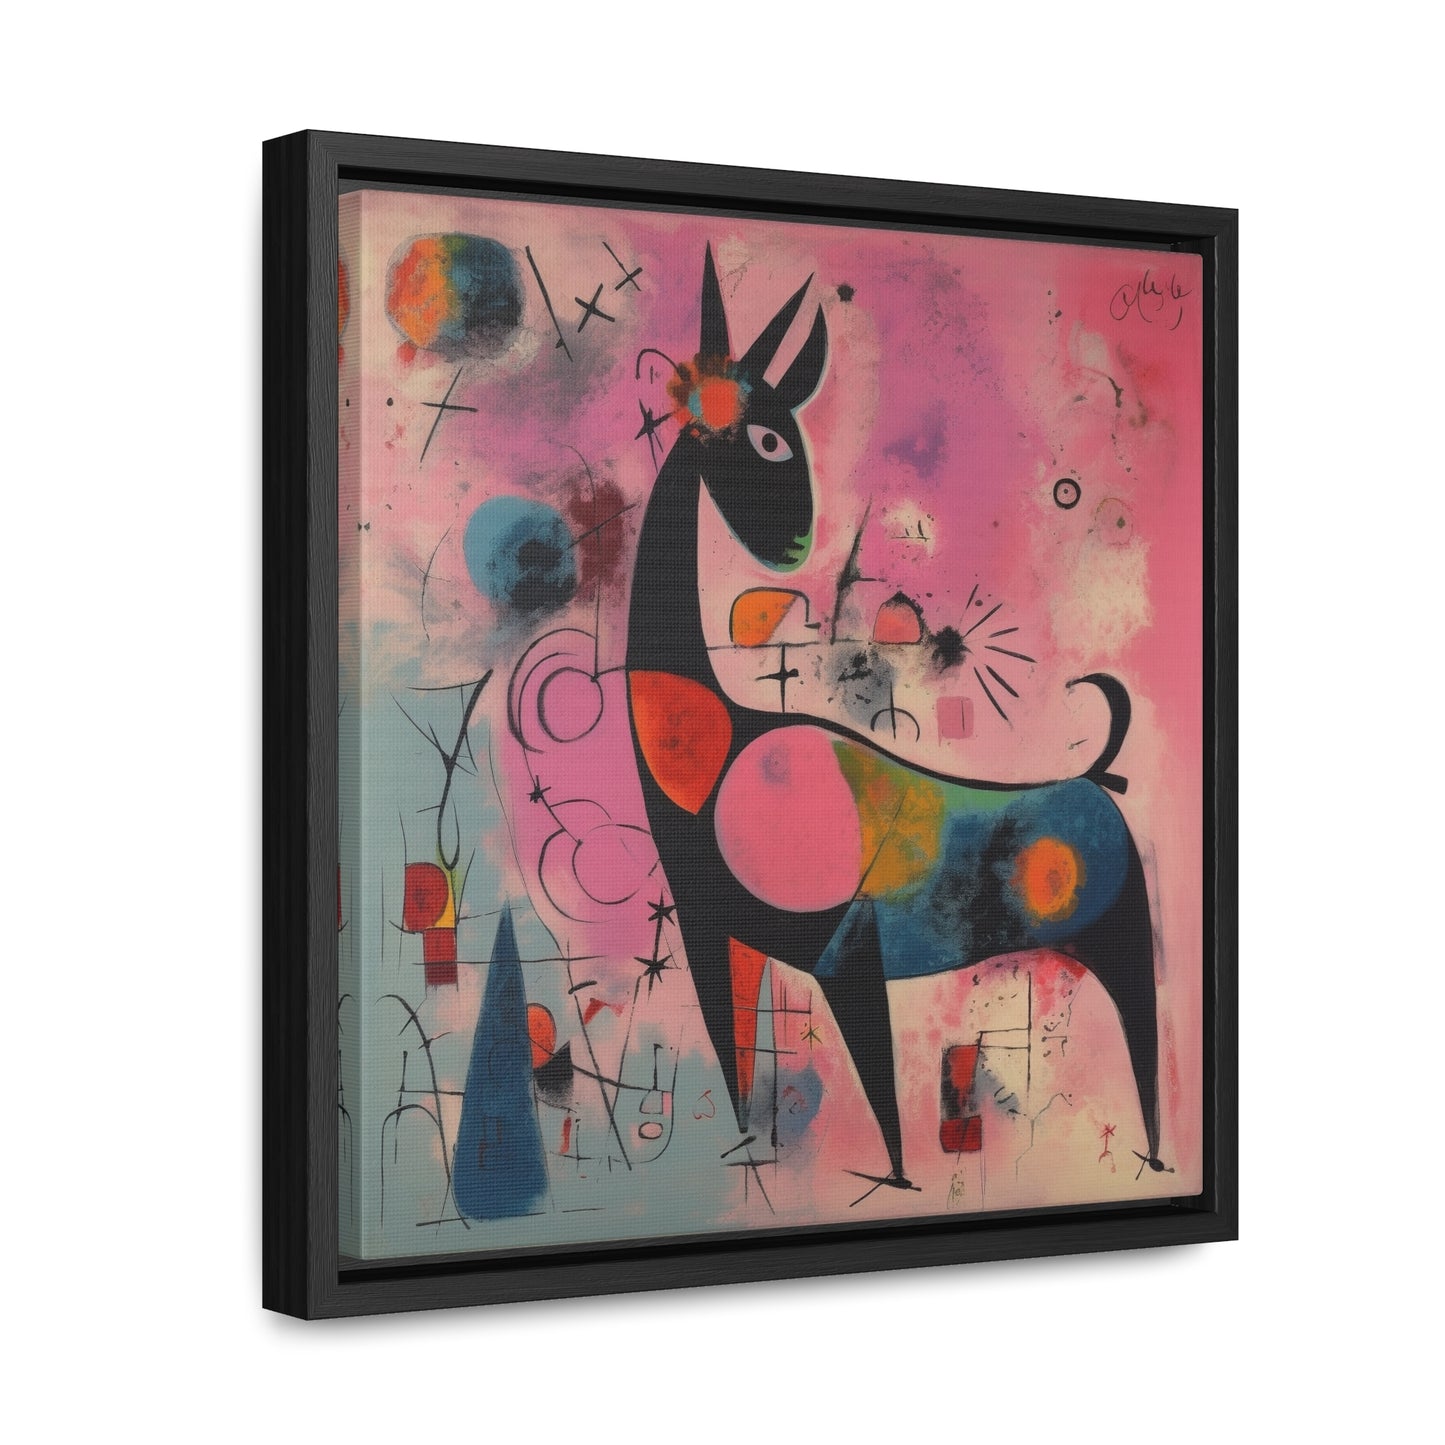 The Dreams of the Child 48, Gallery Canvas Wraps, Square Frame